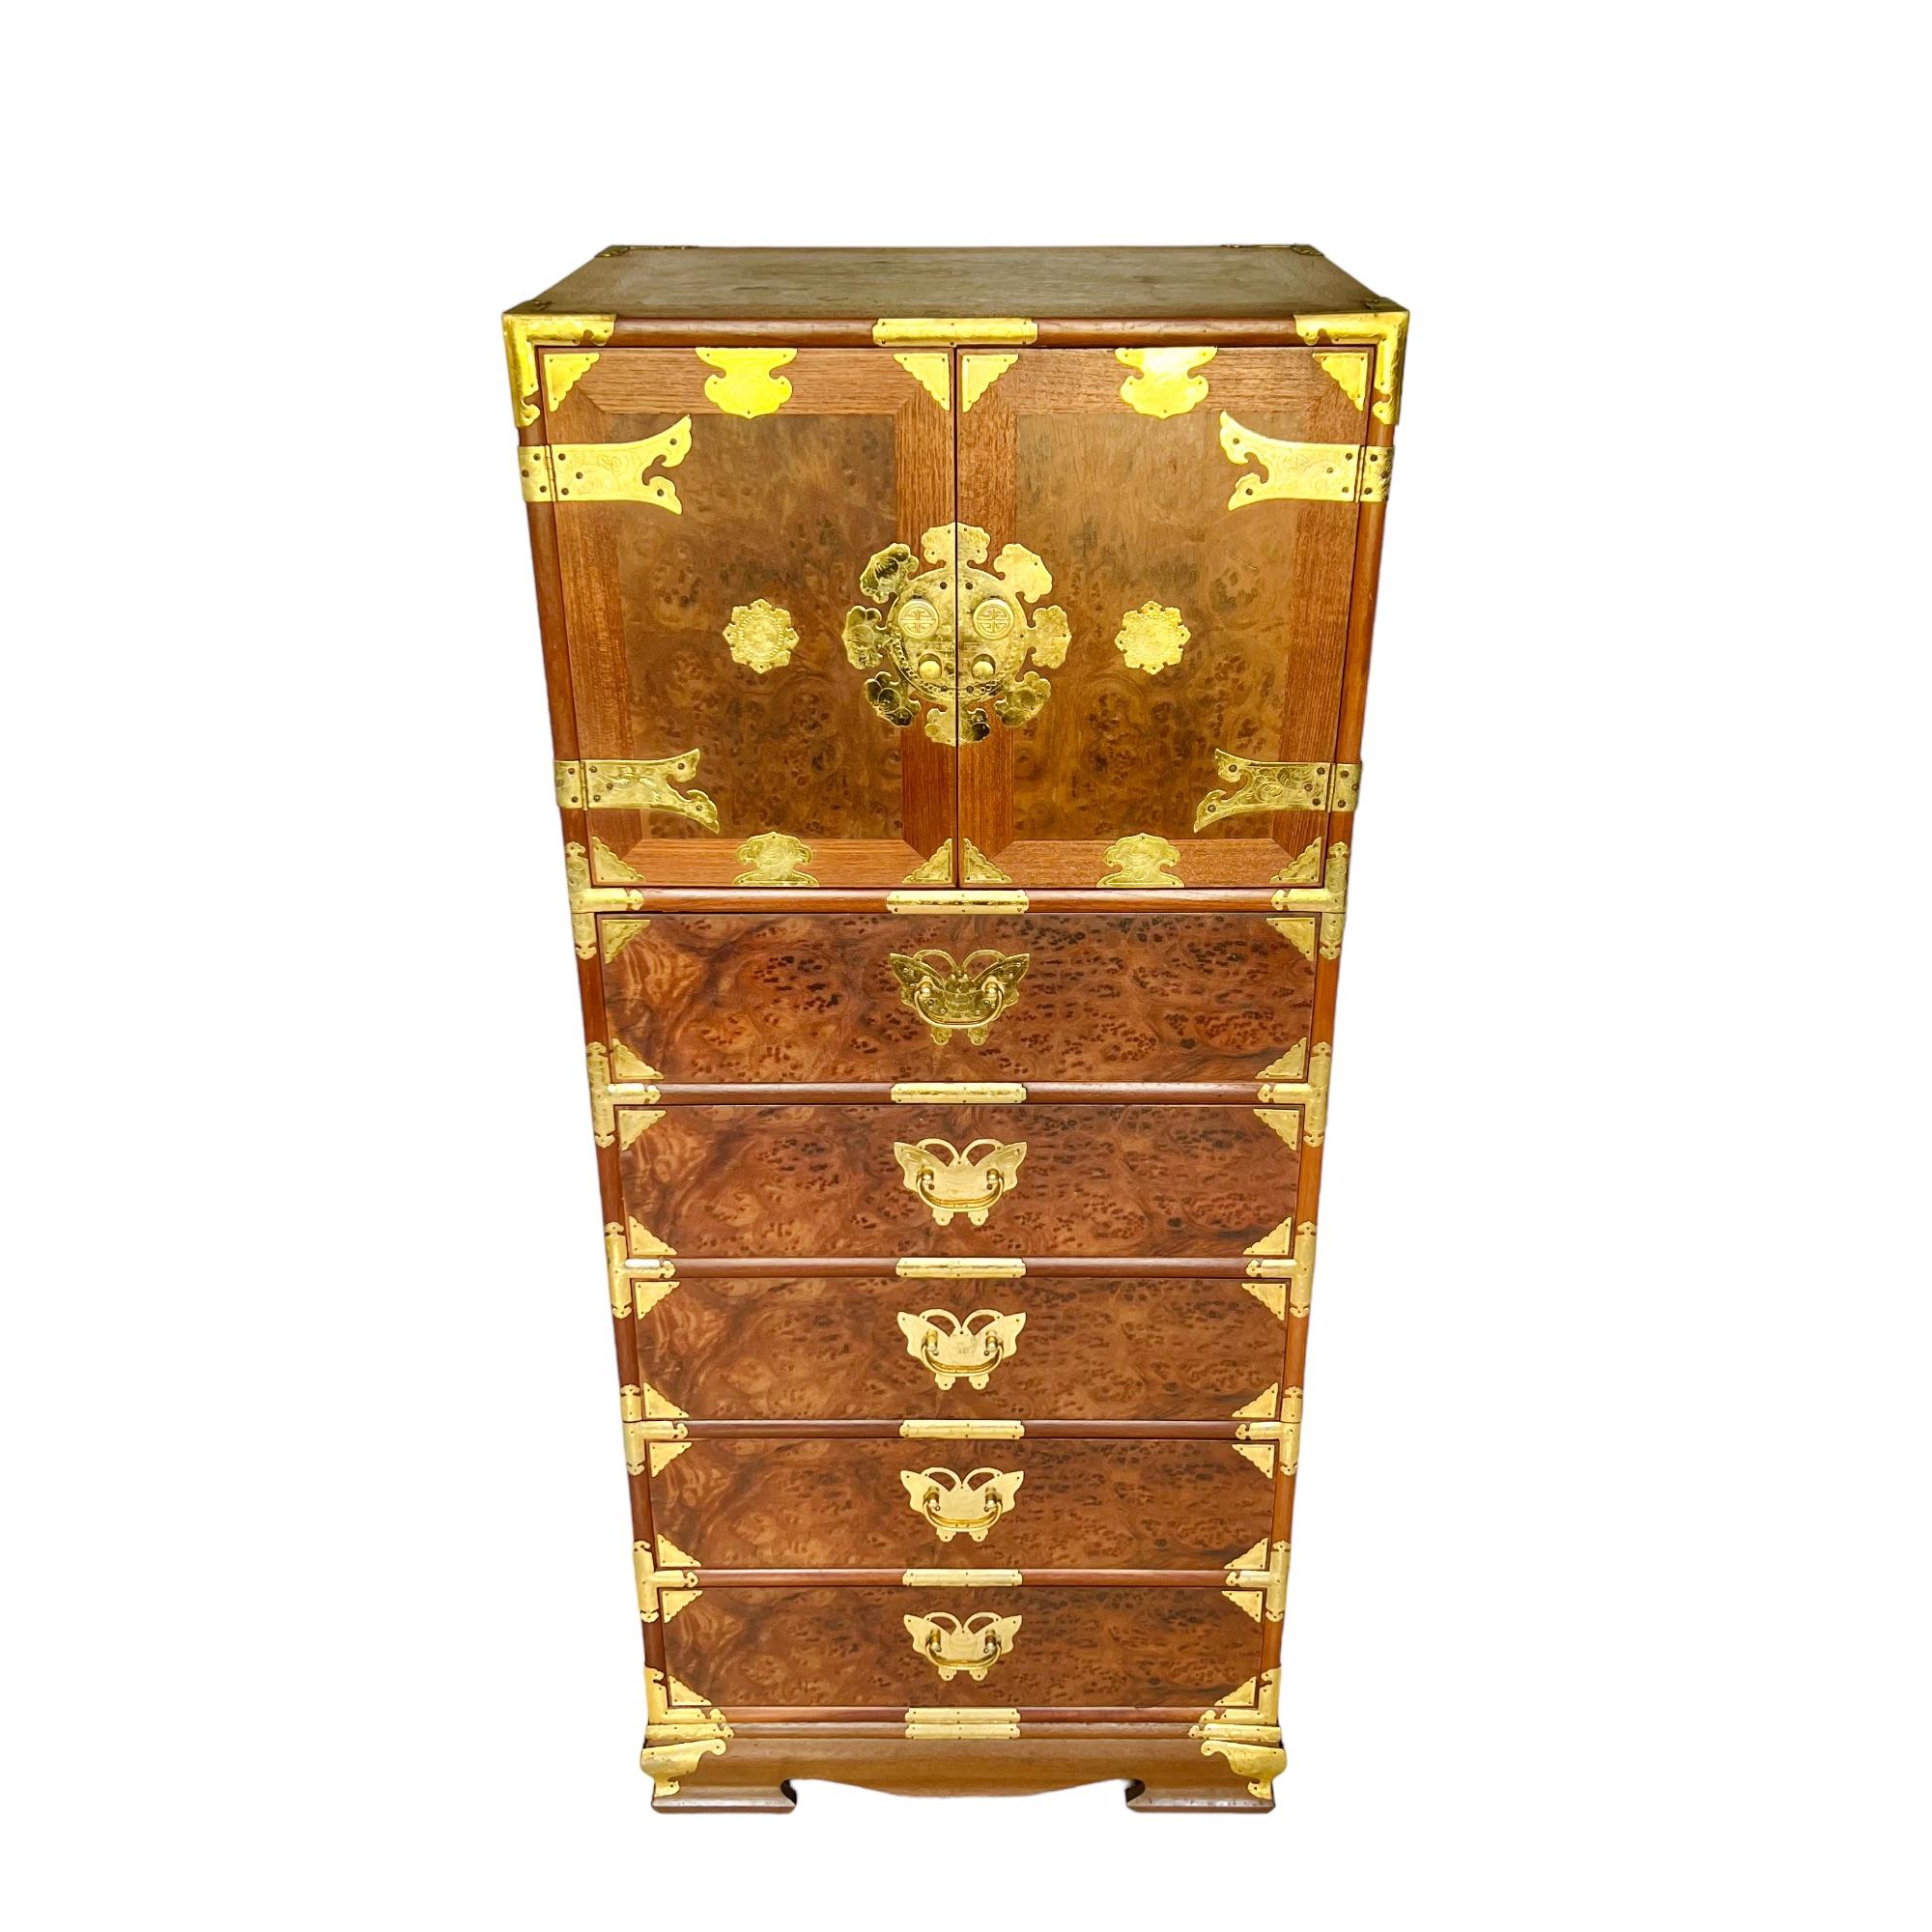 A vintage 1960s Chinese Campaign style lingerie chest finely crafted of teak and burl elm wood and embellished with etched brass mounts. This stunning chiffonier features a medallion adorned upper cabinet and boasts a total of eleven drawers - six